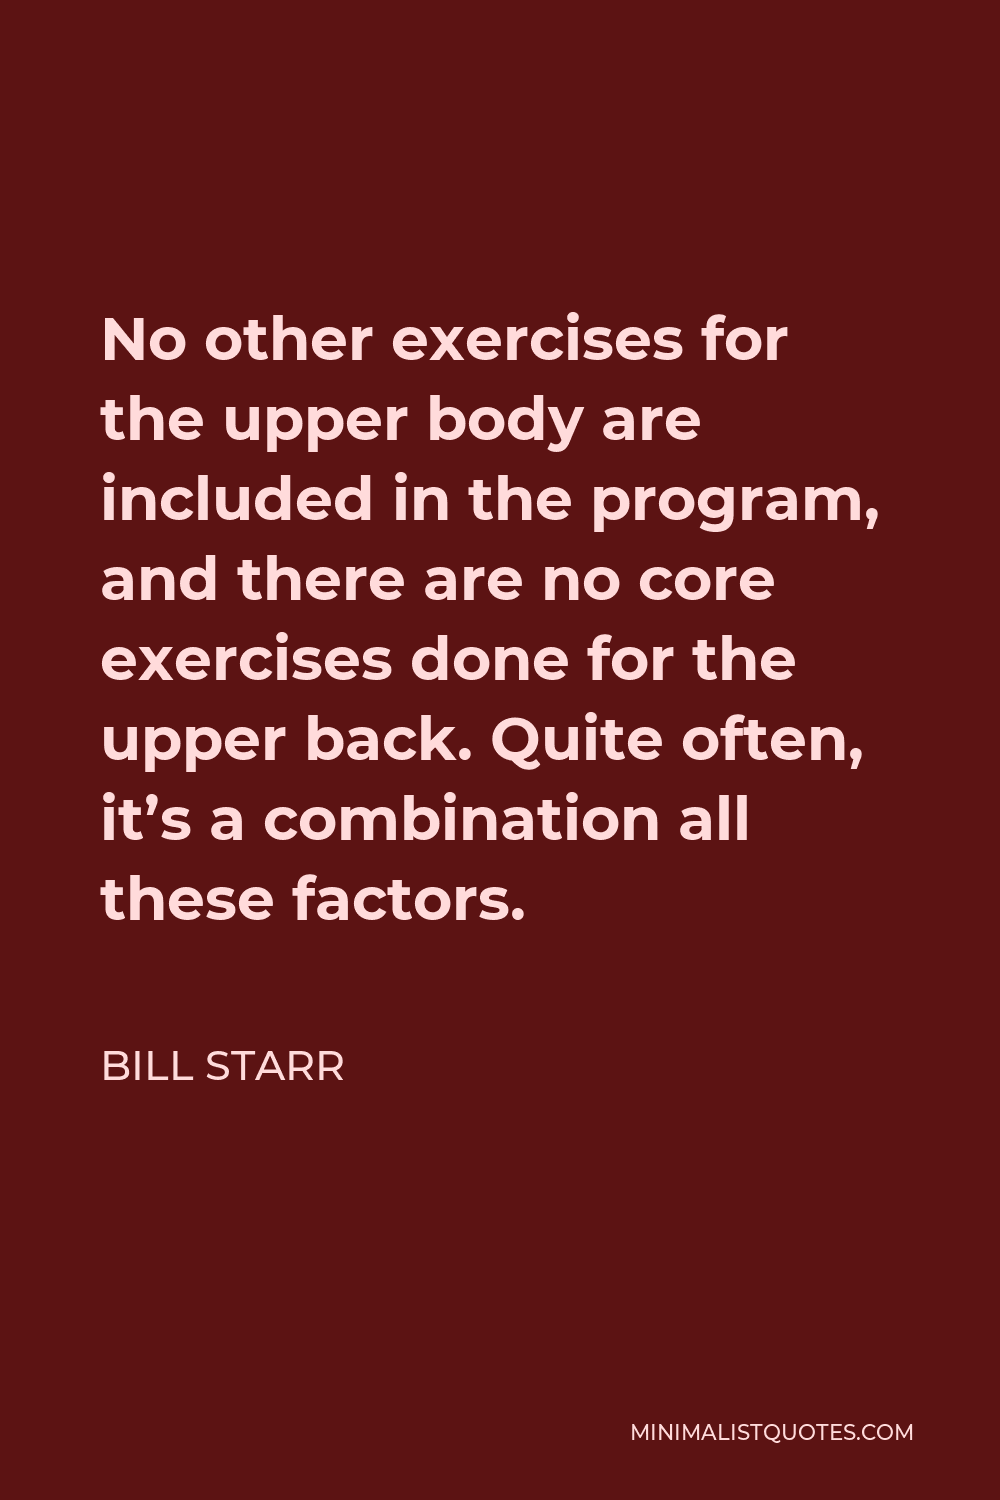 Bill Starr Quote - No other exercises for the upper body are included in the program, and there are no core exercises done for the upper back. Quite often, it’s a combination all these factors.